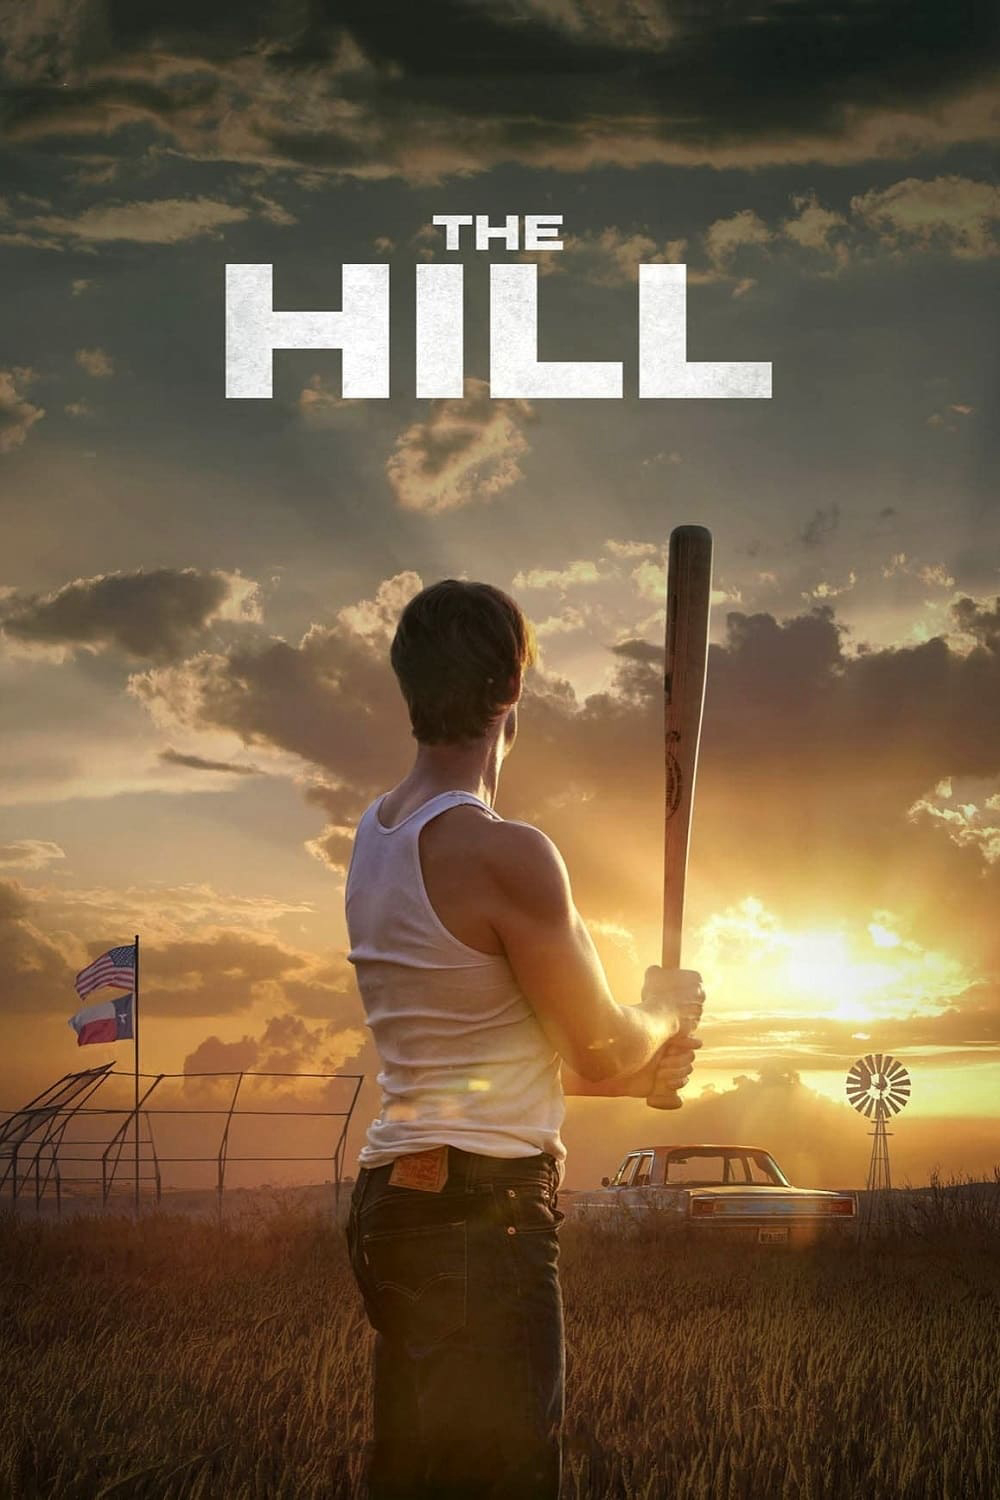 Poster Phim The Hill (The Hill)